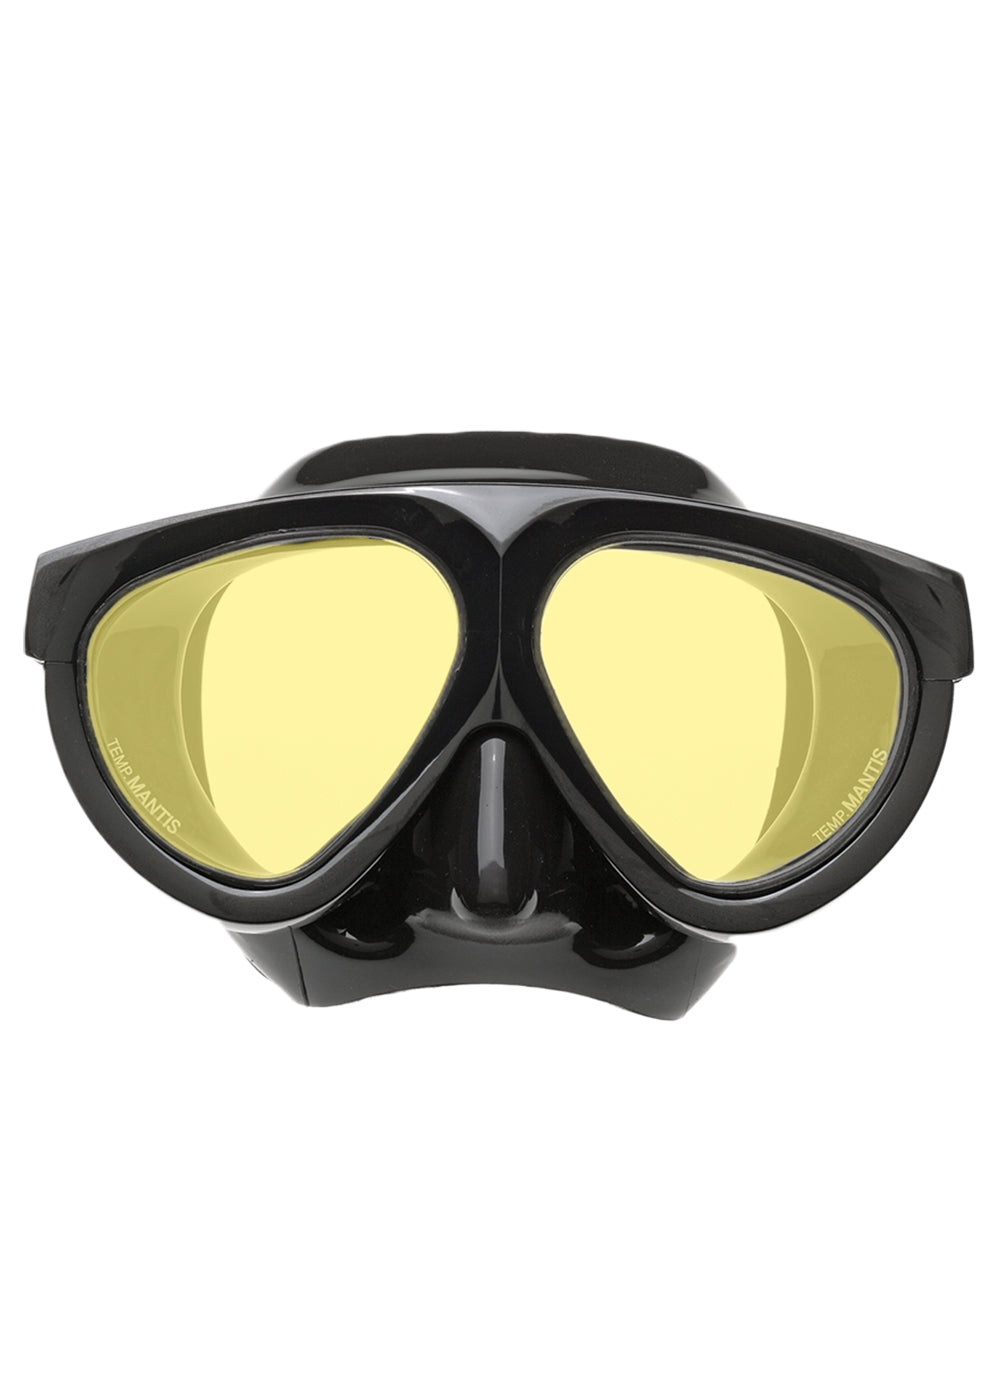 Riffe Mantis Mask Amber Lens - Adreno - Ocean Outfitters